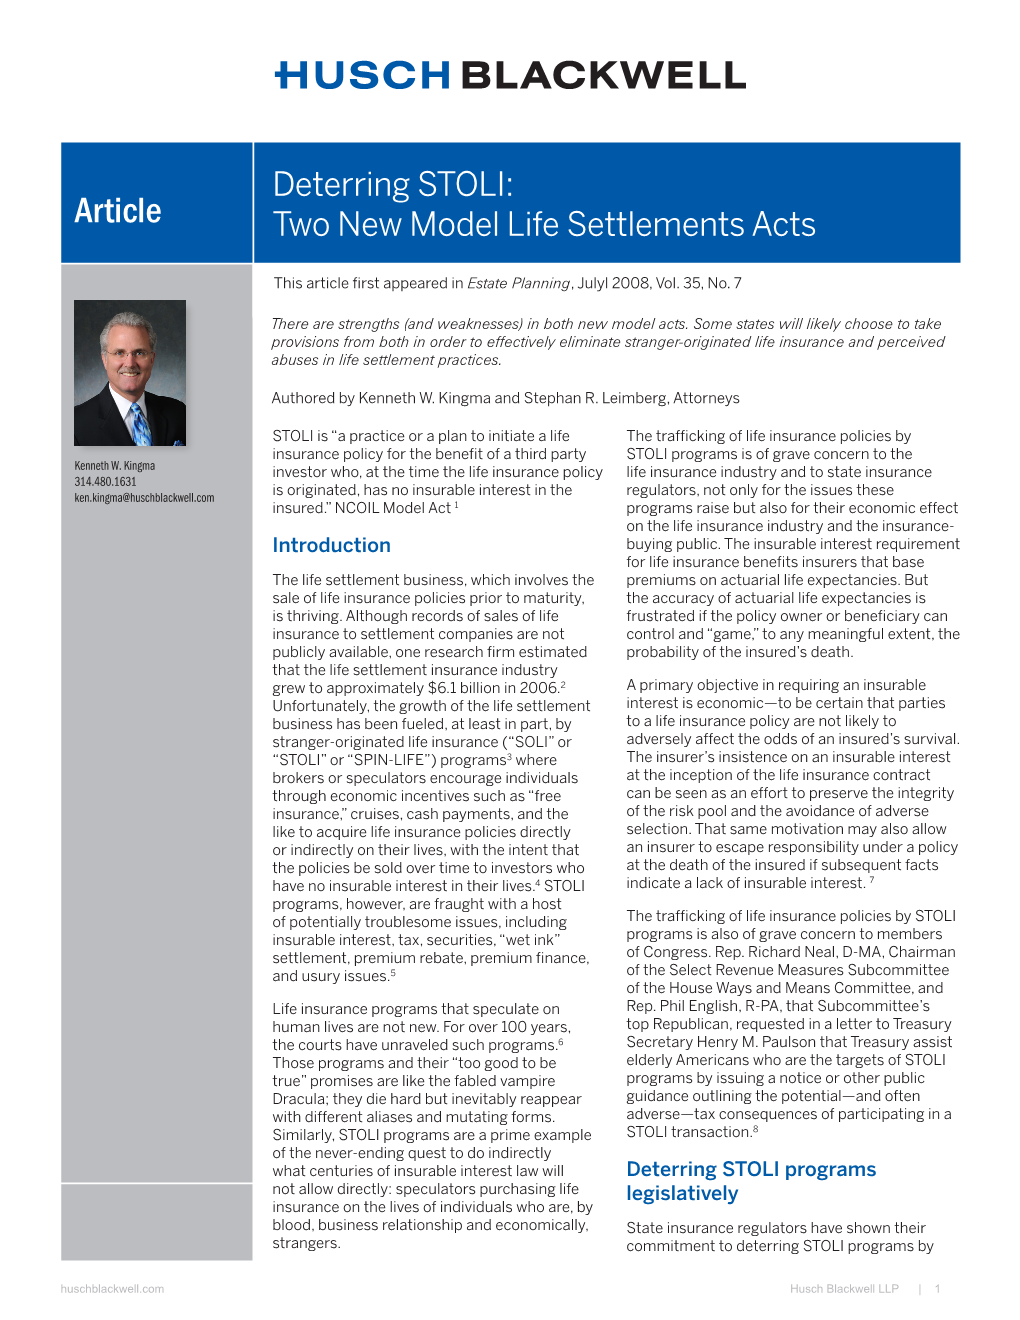 Deterring STOLI: Article Two New Model Life Settlements Acts